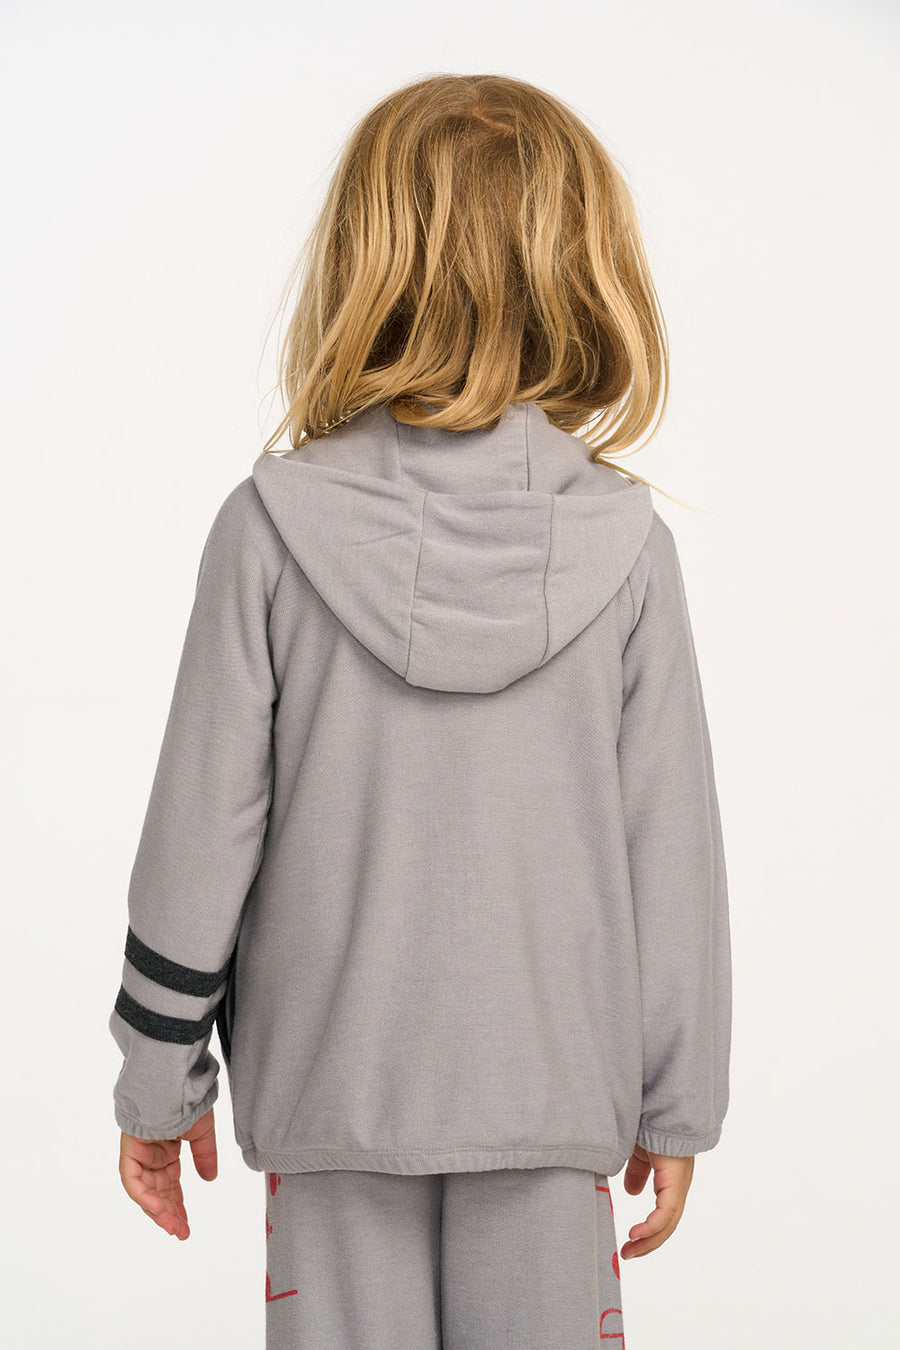 Silver Gray Zip Up Hoodie BOYS chaserbrand